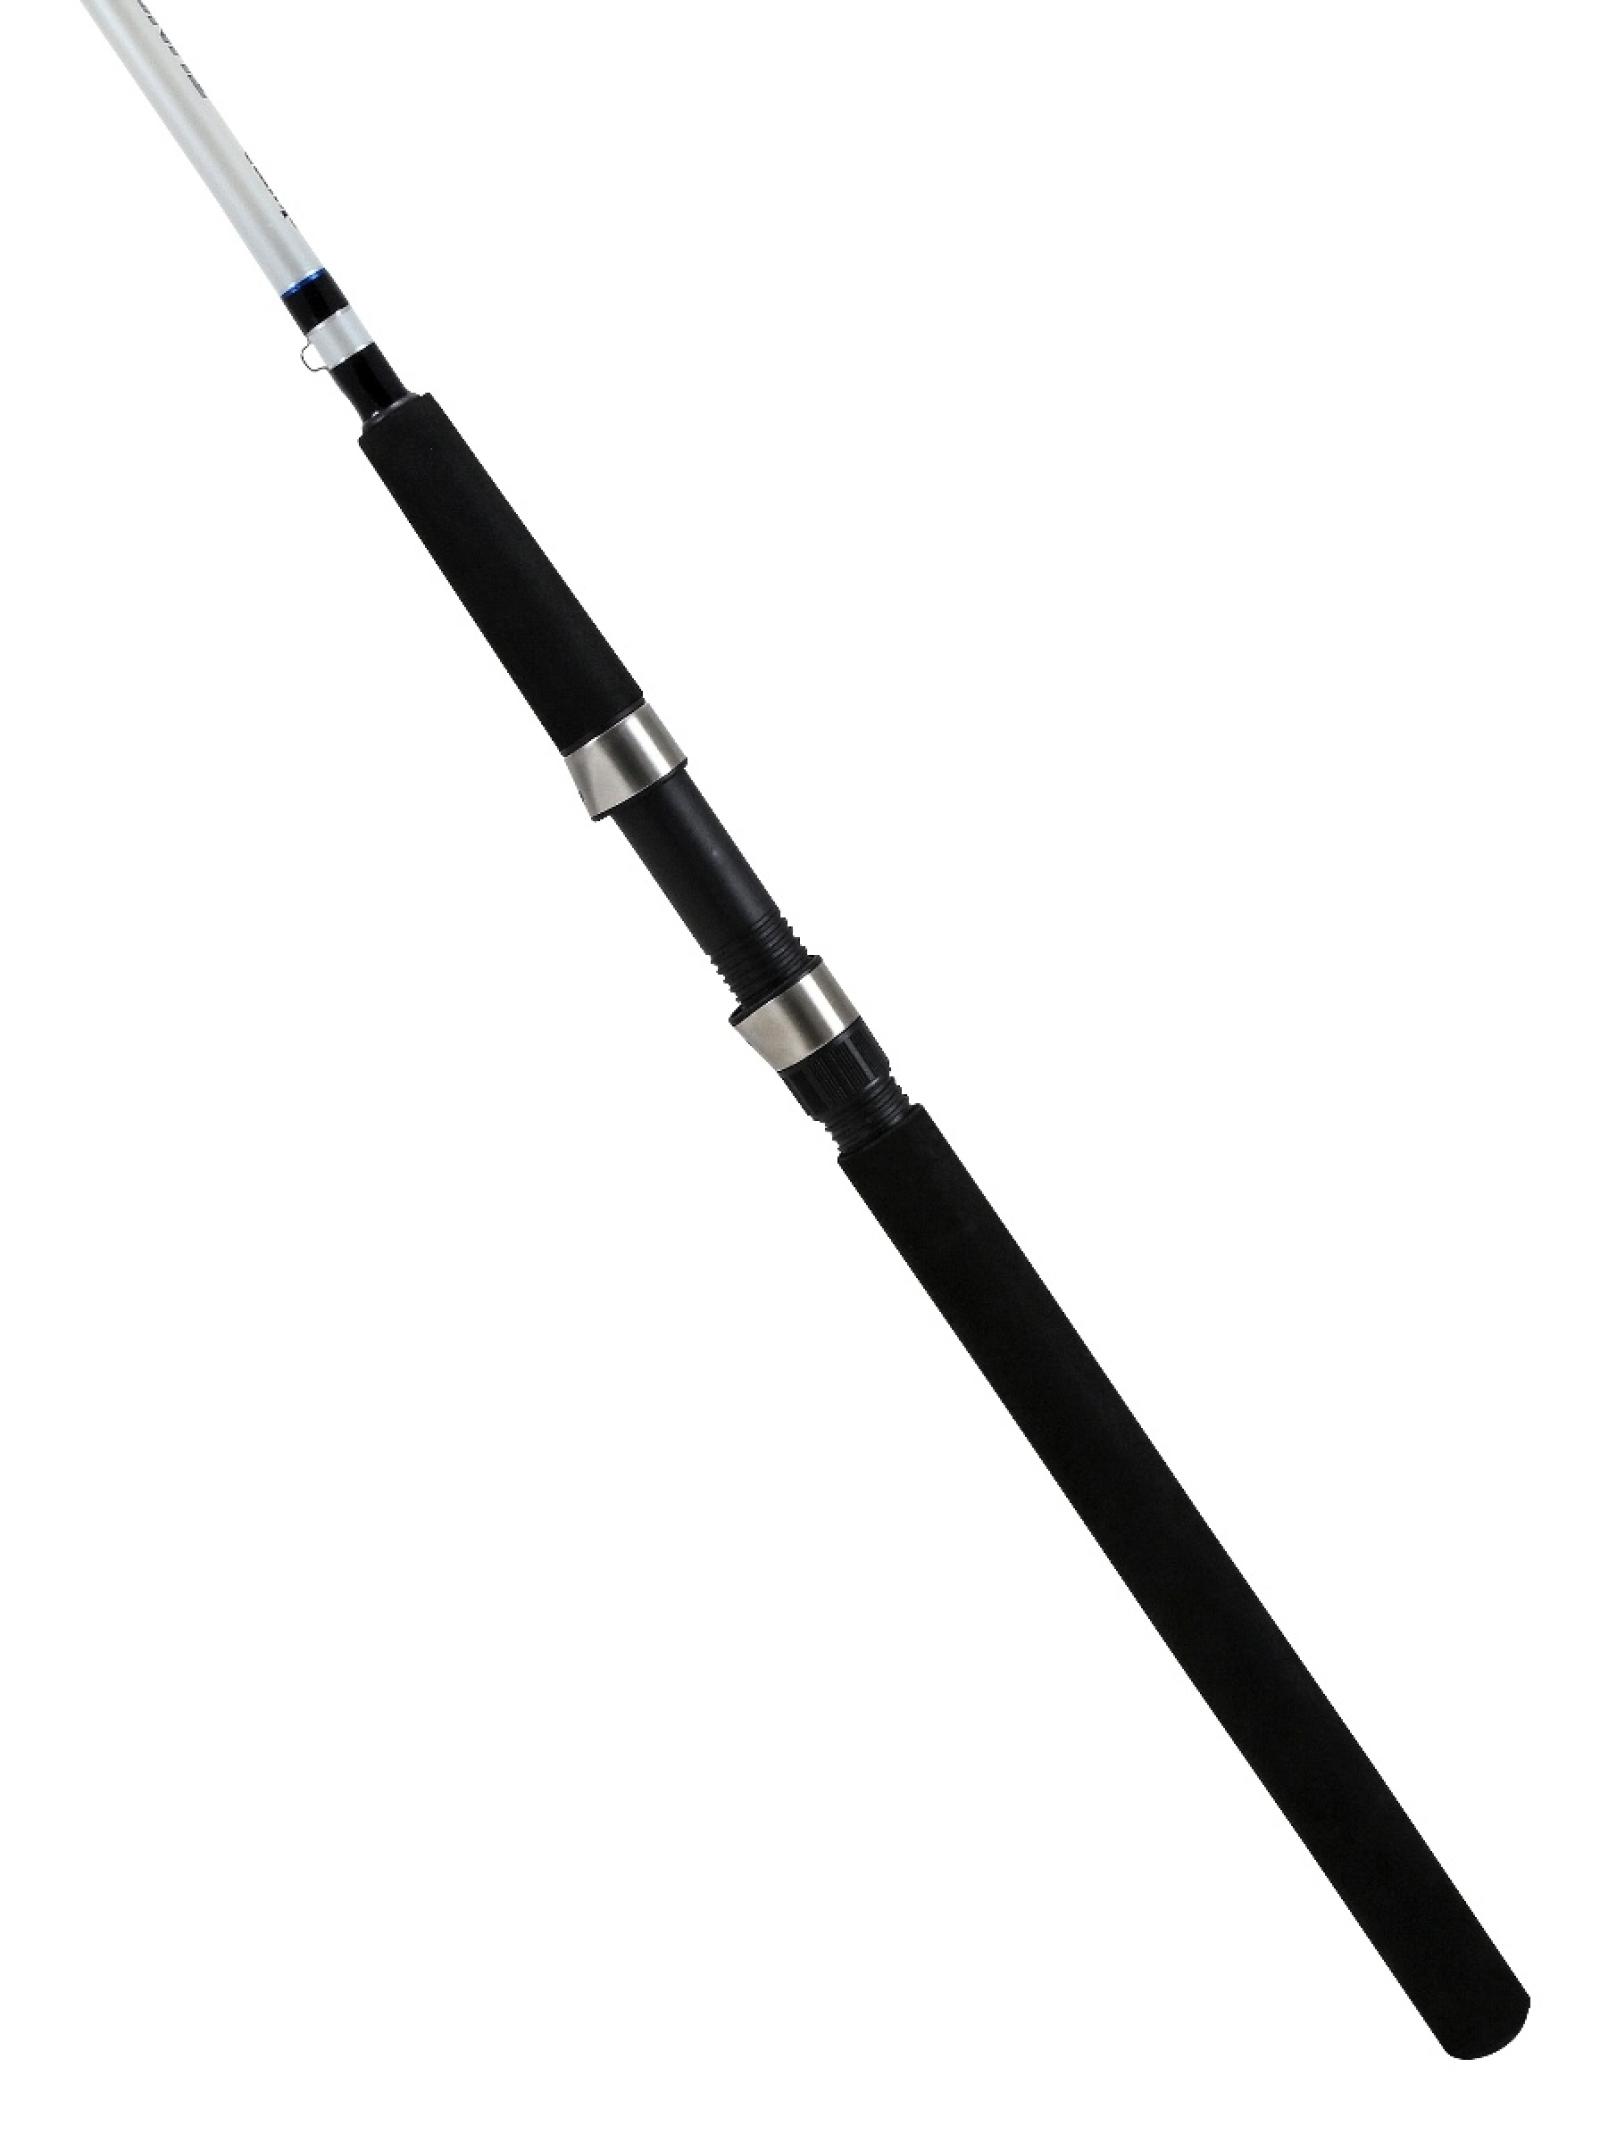 Tundra Pro Rod and Spinning Reel Combo